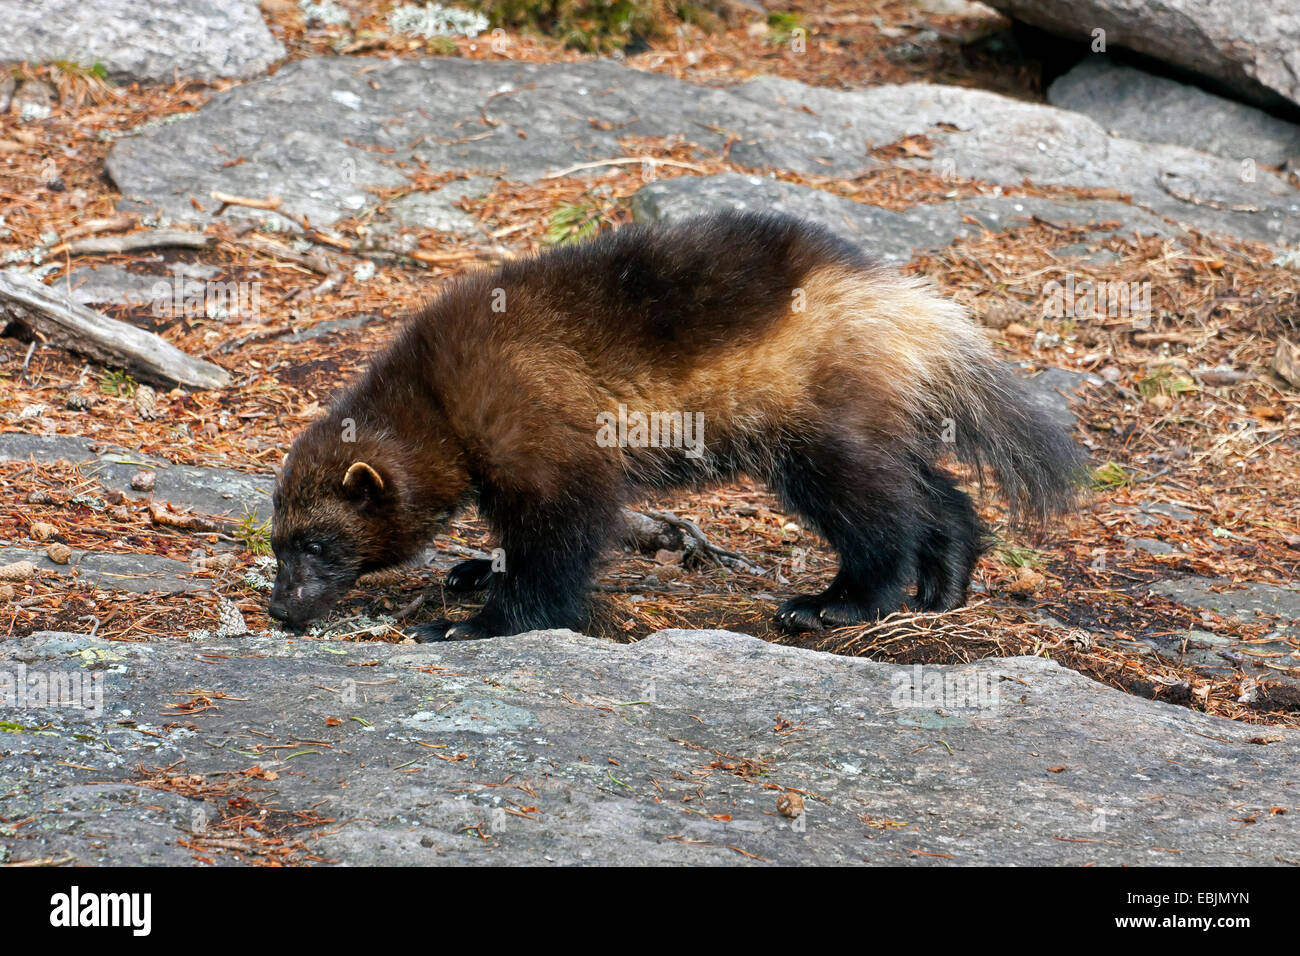 wolverine (Gulo gulo), sniffing, side view, Sweden, Hamra National Park Stock Photo